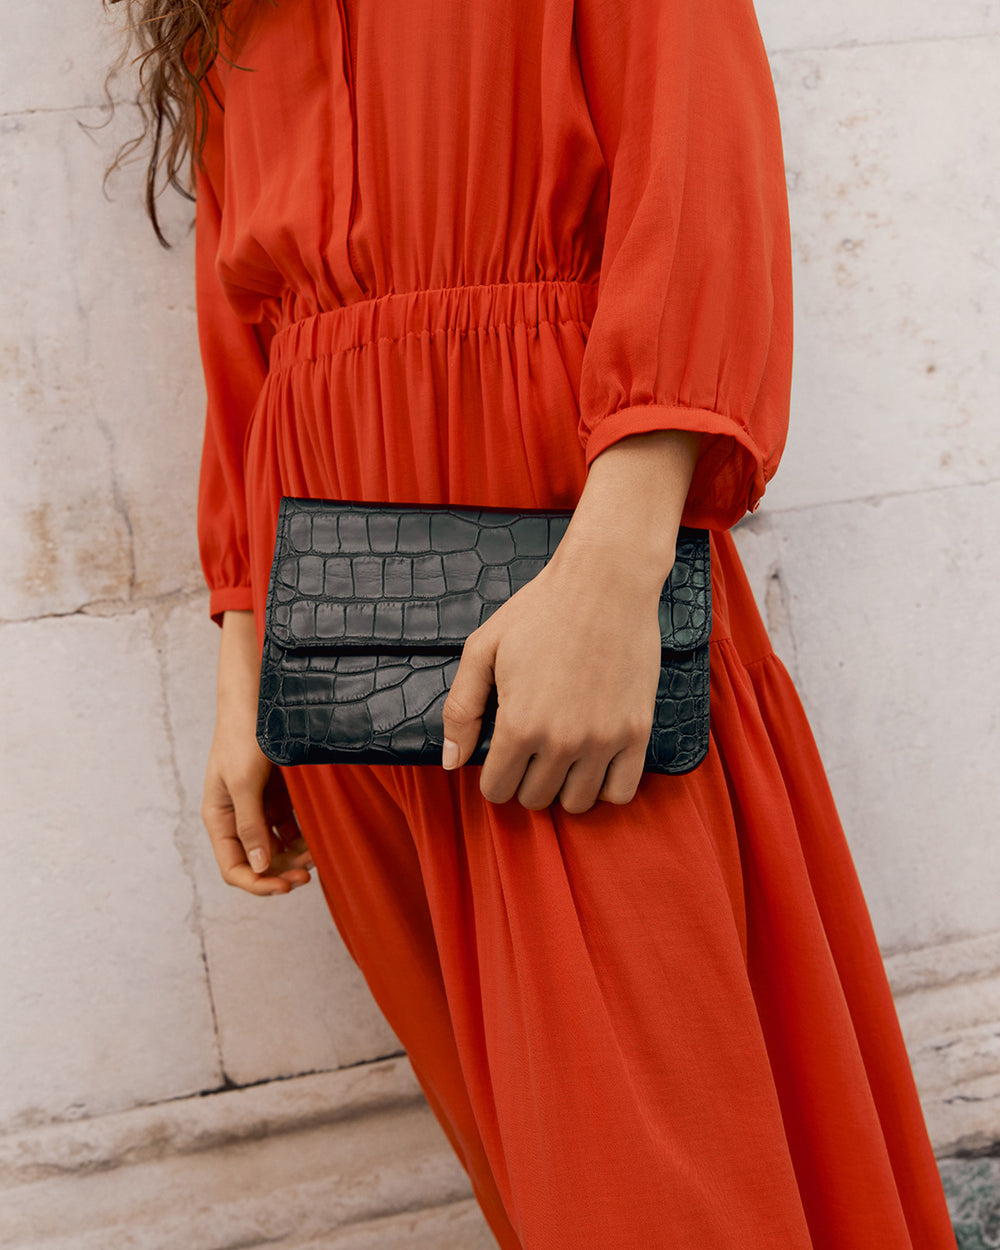 Person holding a croc-embossed leather clutch bag wearing a dress standing near a wall